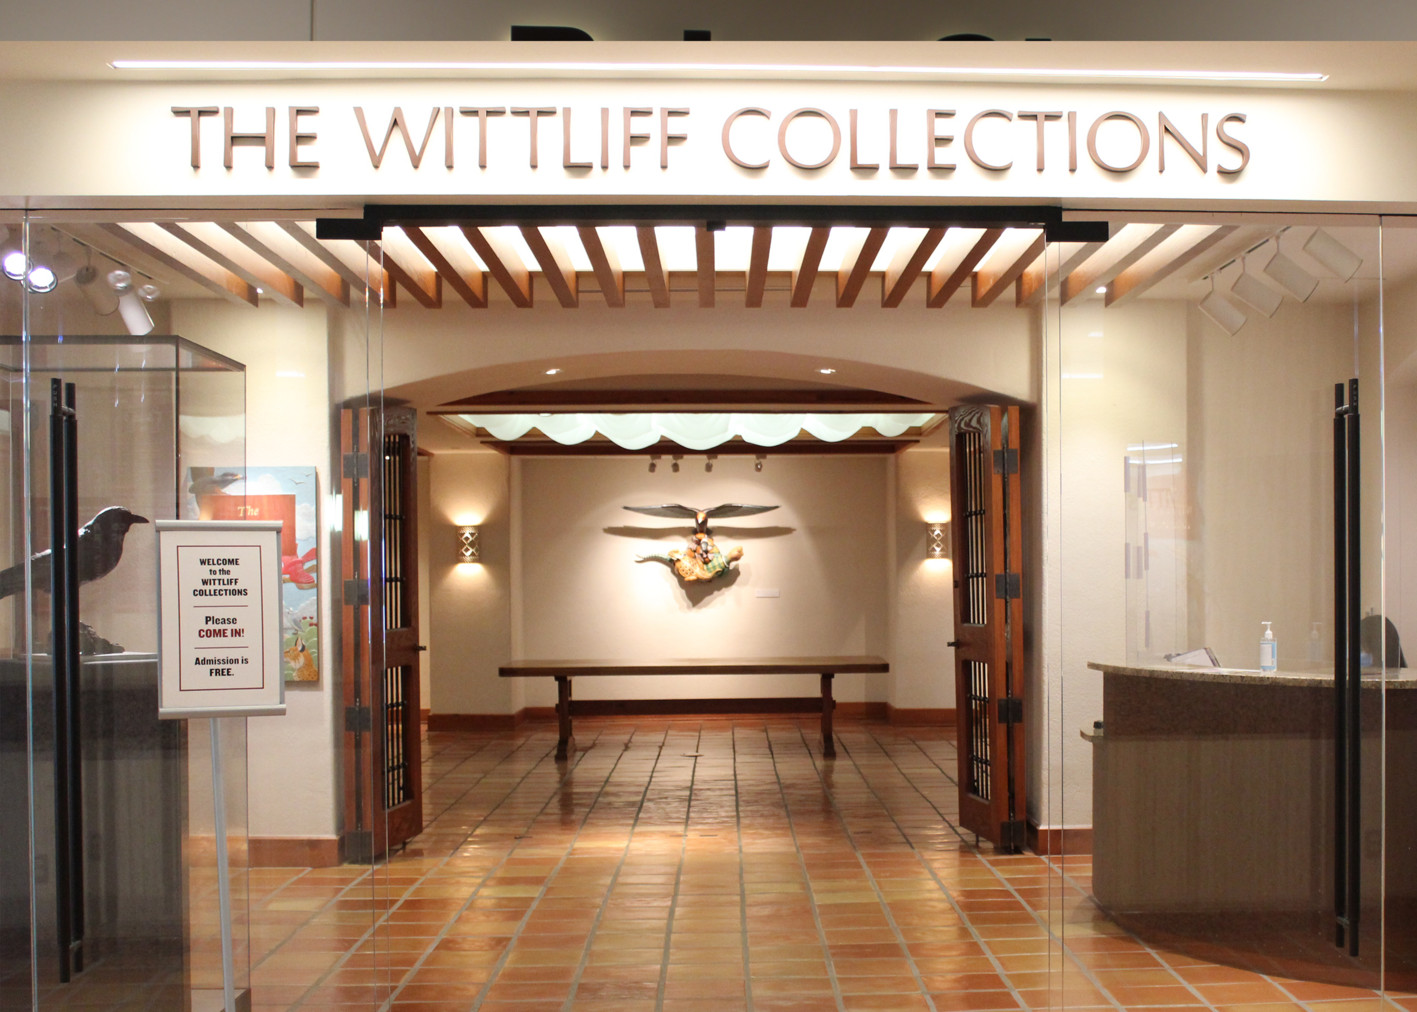 The Wittliff Lobby